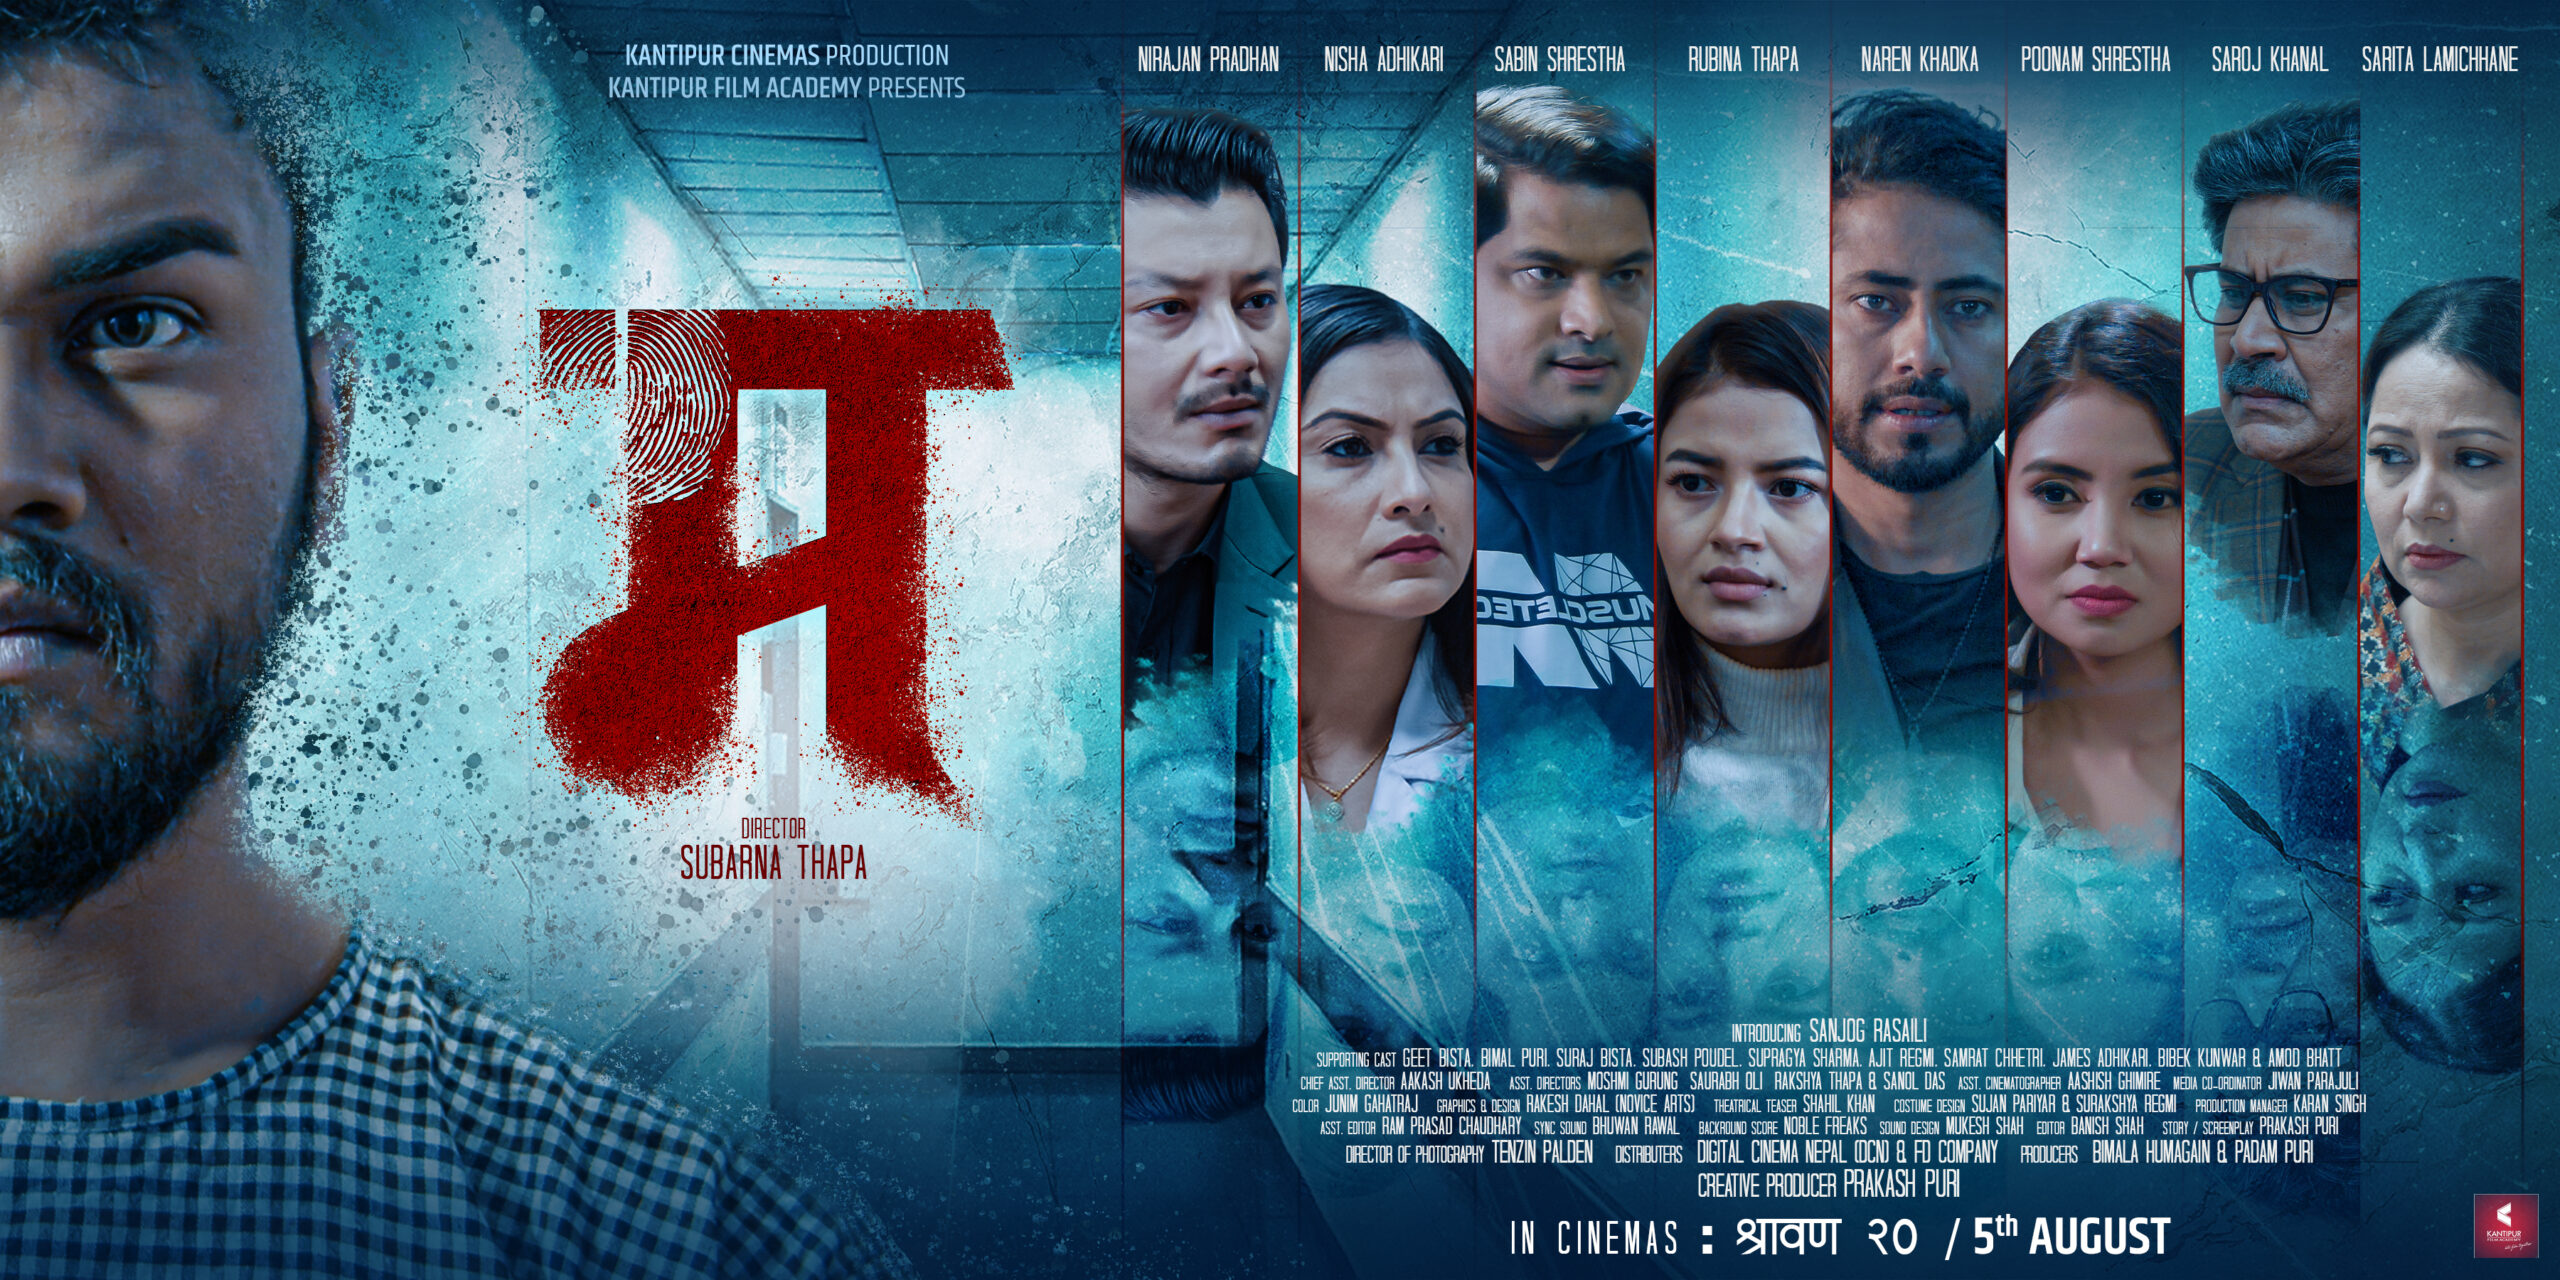 Two posters of the movie ‘Ma’ been released